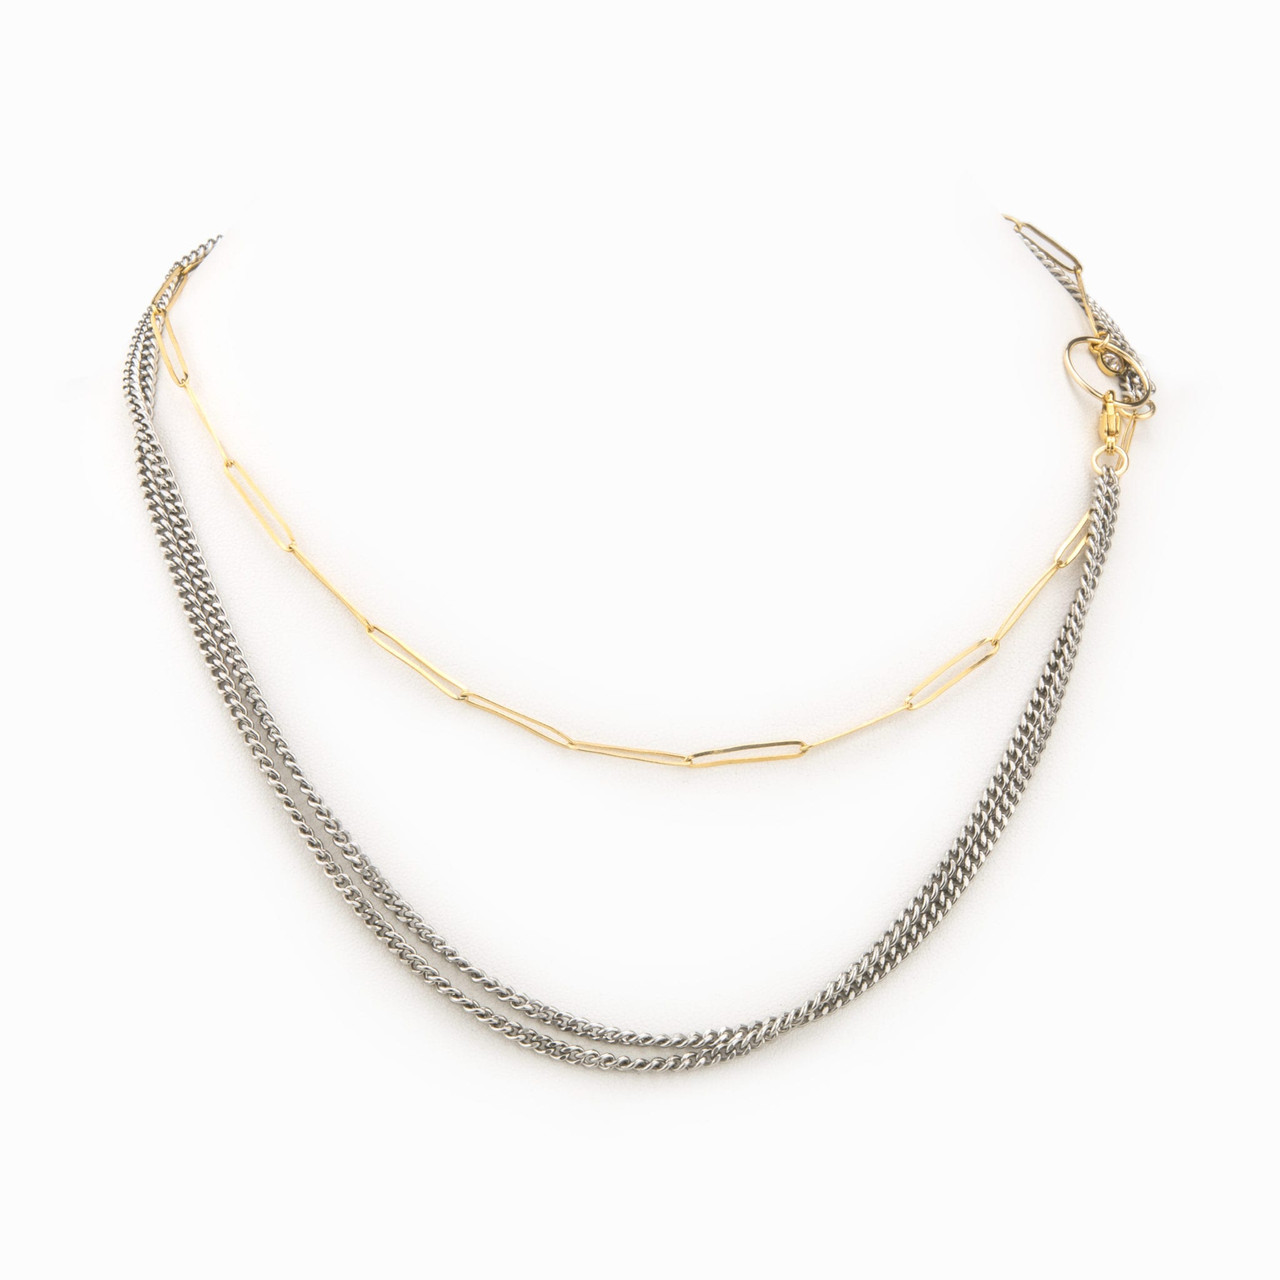 Staple Mixed Metal Necklace